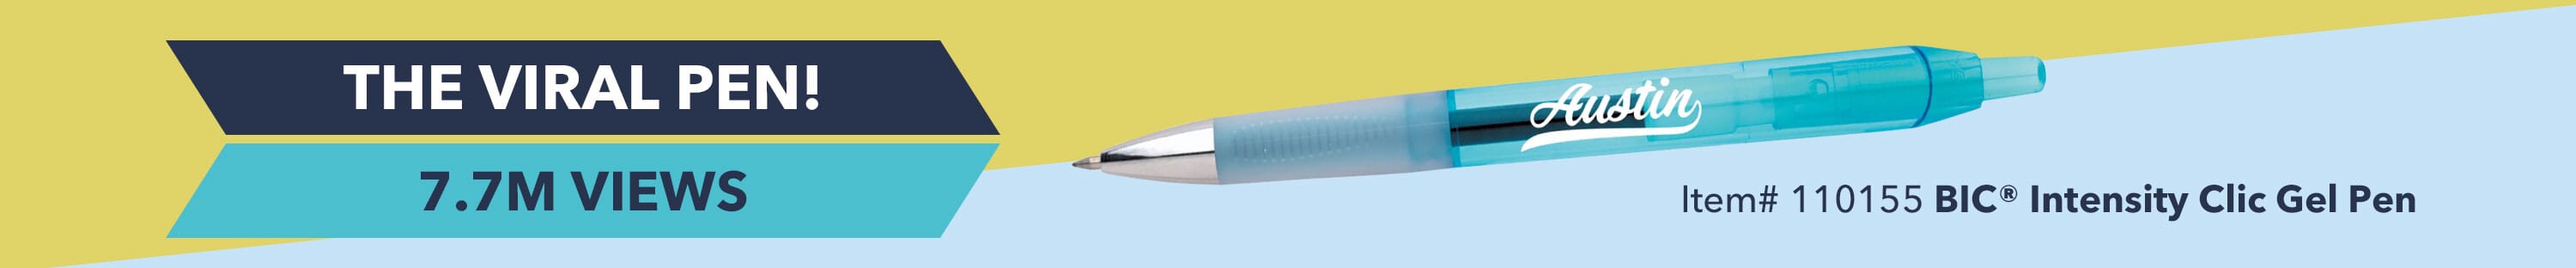 The BIC pen that went viral